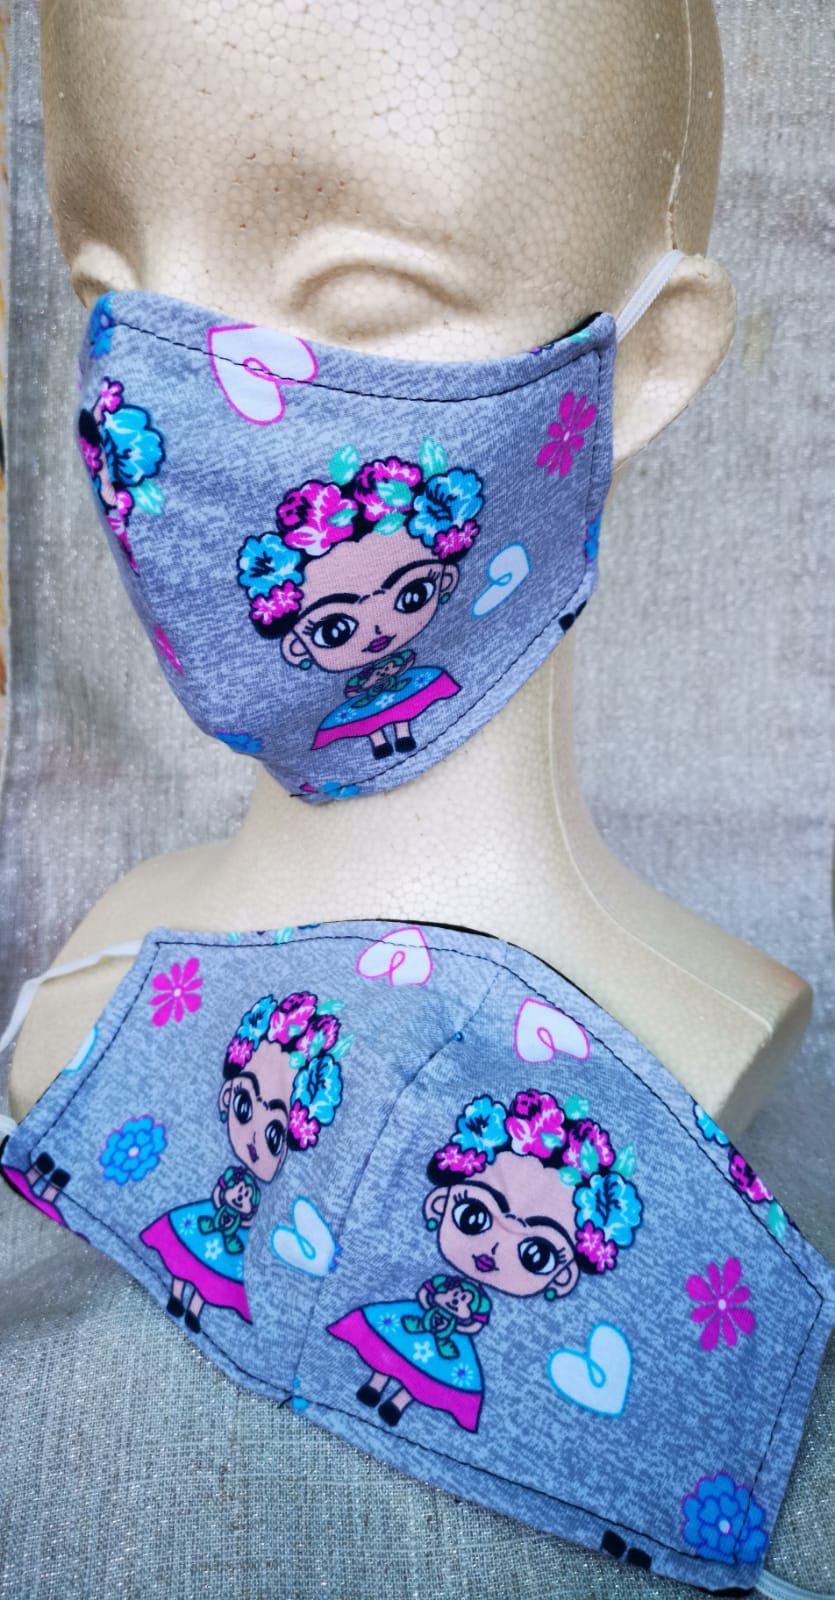 Adult Large Face mask (Frida Kahlo Gray): Hand made mask, reversible, reusable, washer and dryer safe. #halloween #girls clothes